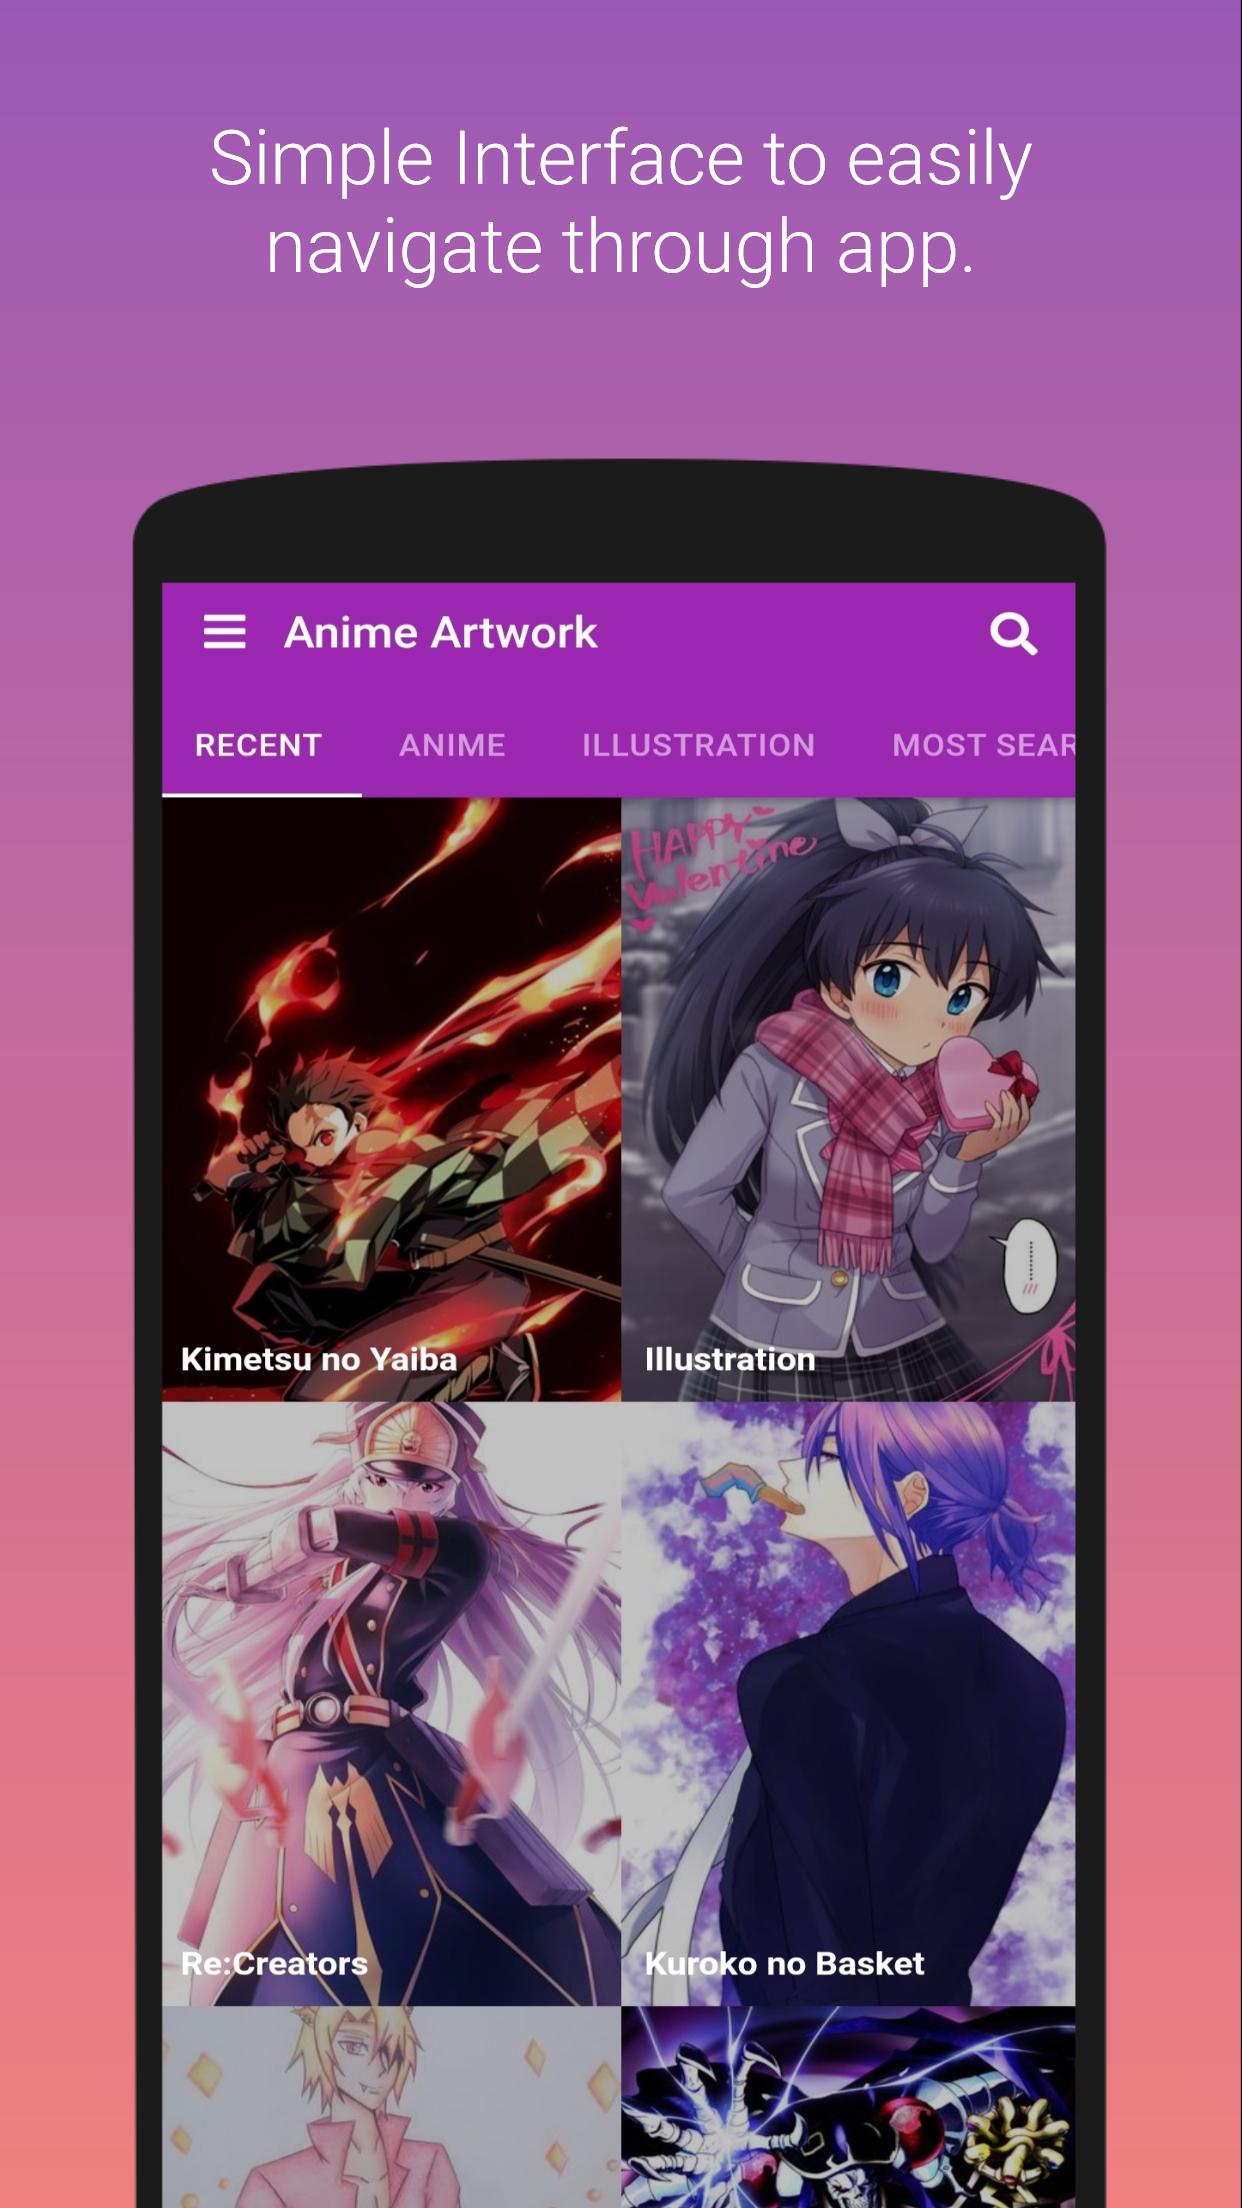 Download Anime Wallpapers for FREE [100,000+ Mobile & Desktop